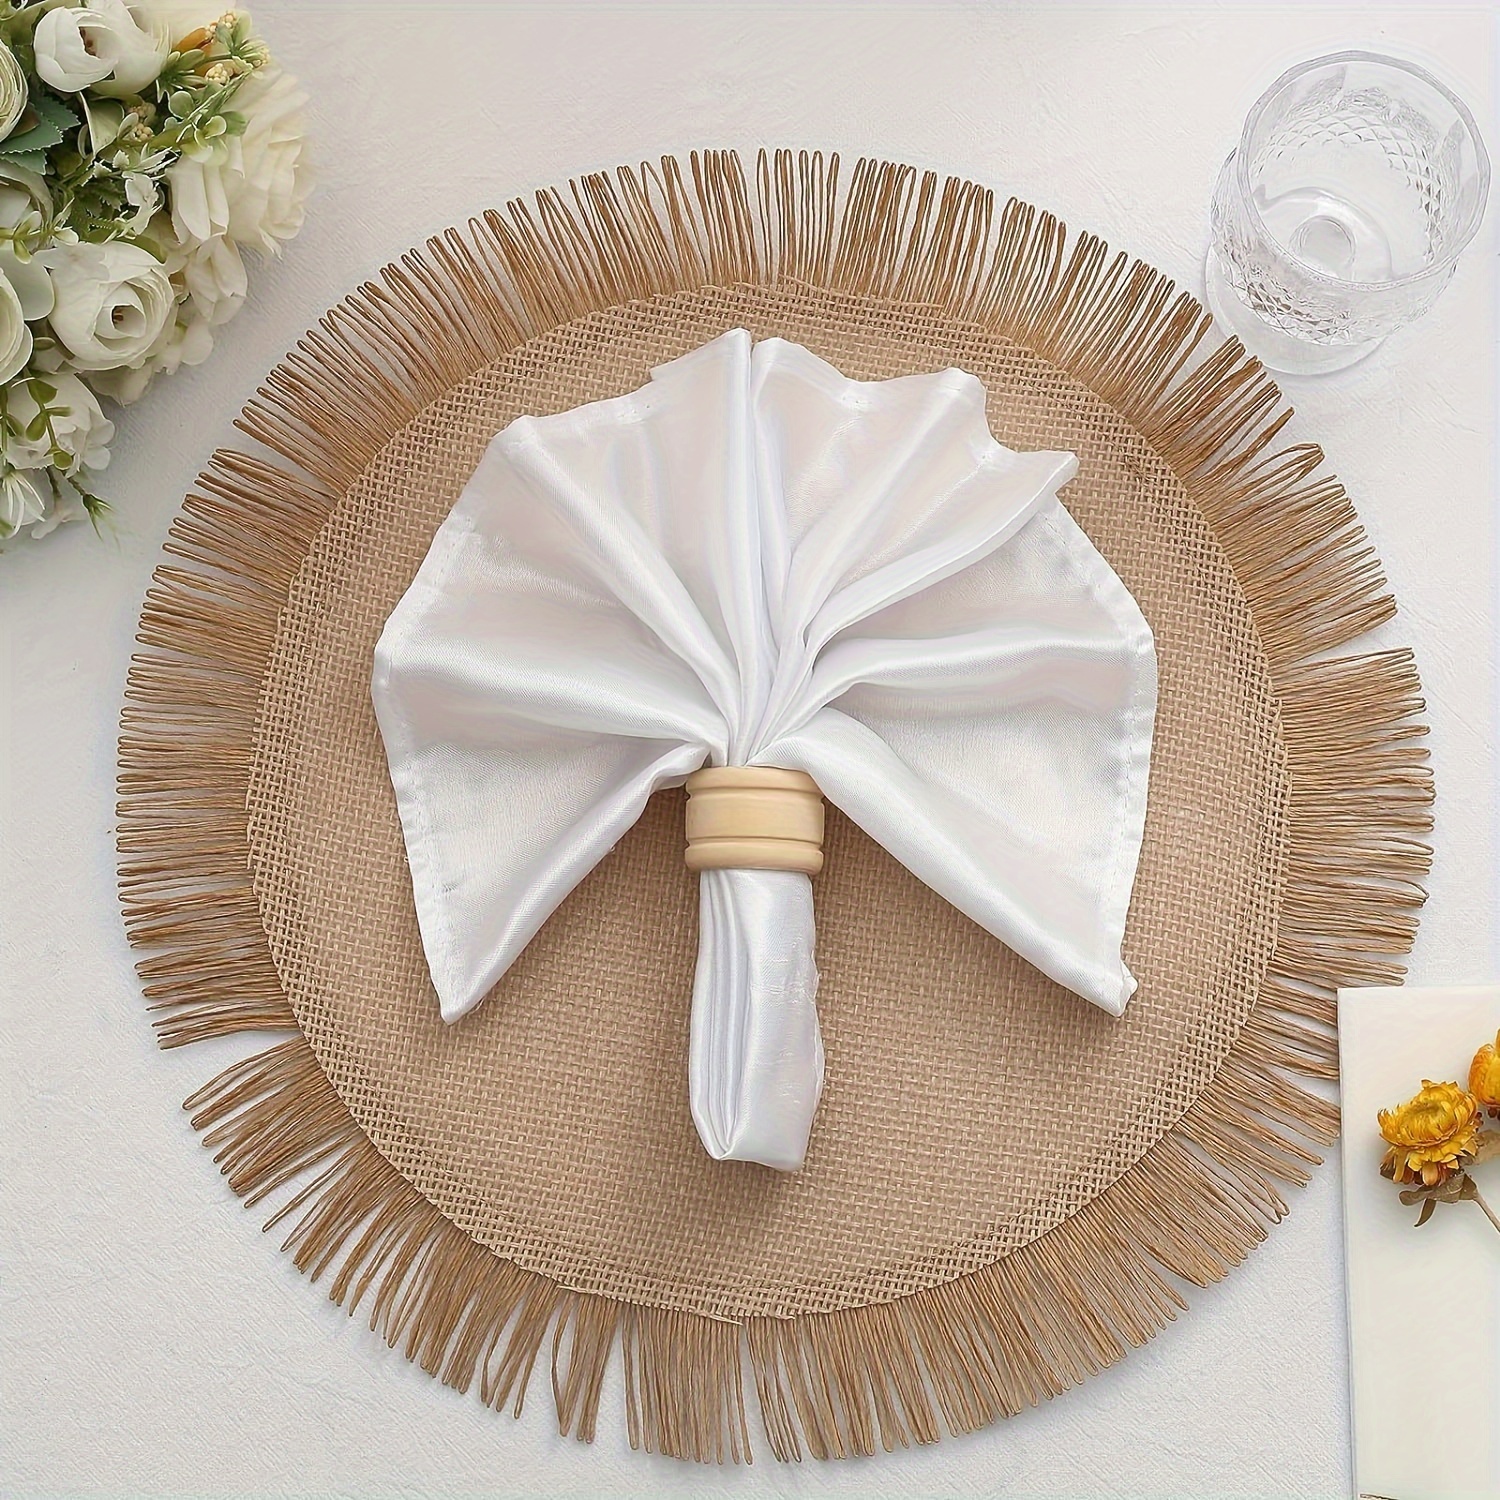 

4pcs Placemats, Natural Jute Straw Weaving Placemats, 16inch Boho Round Rustic Farmhouse Burlap Tassel Dining Table Mats, For Dinning Room And Restaurant, Home Supplies